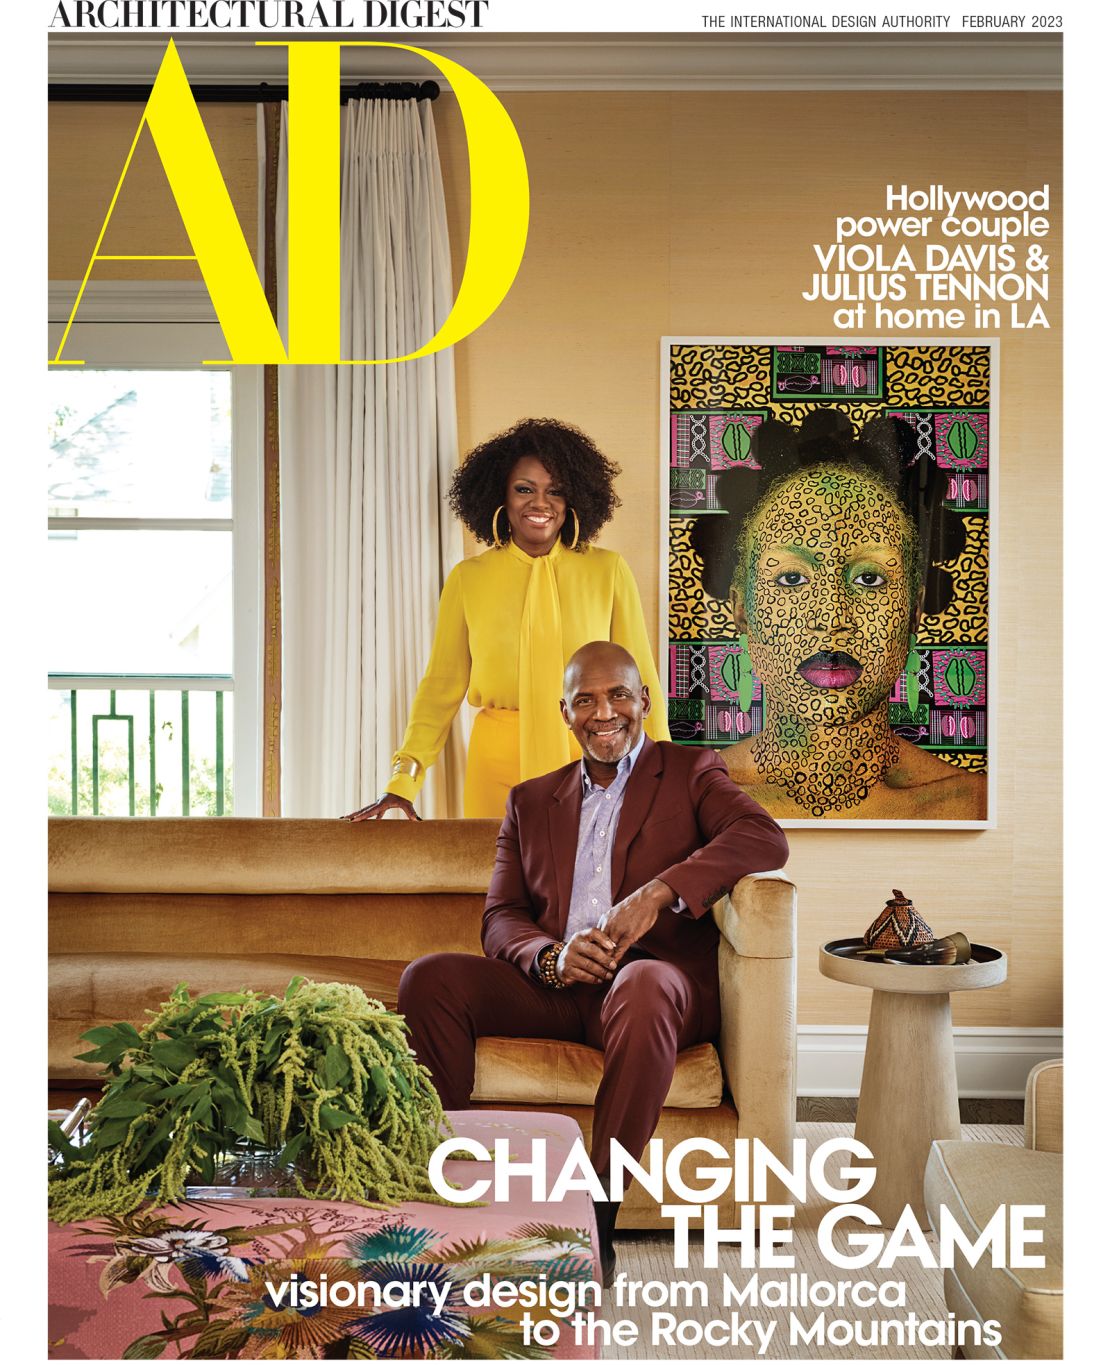 Viola Davis and Julius Tennon in their newly renovated home.